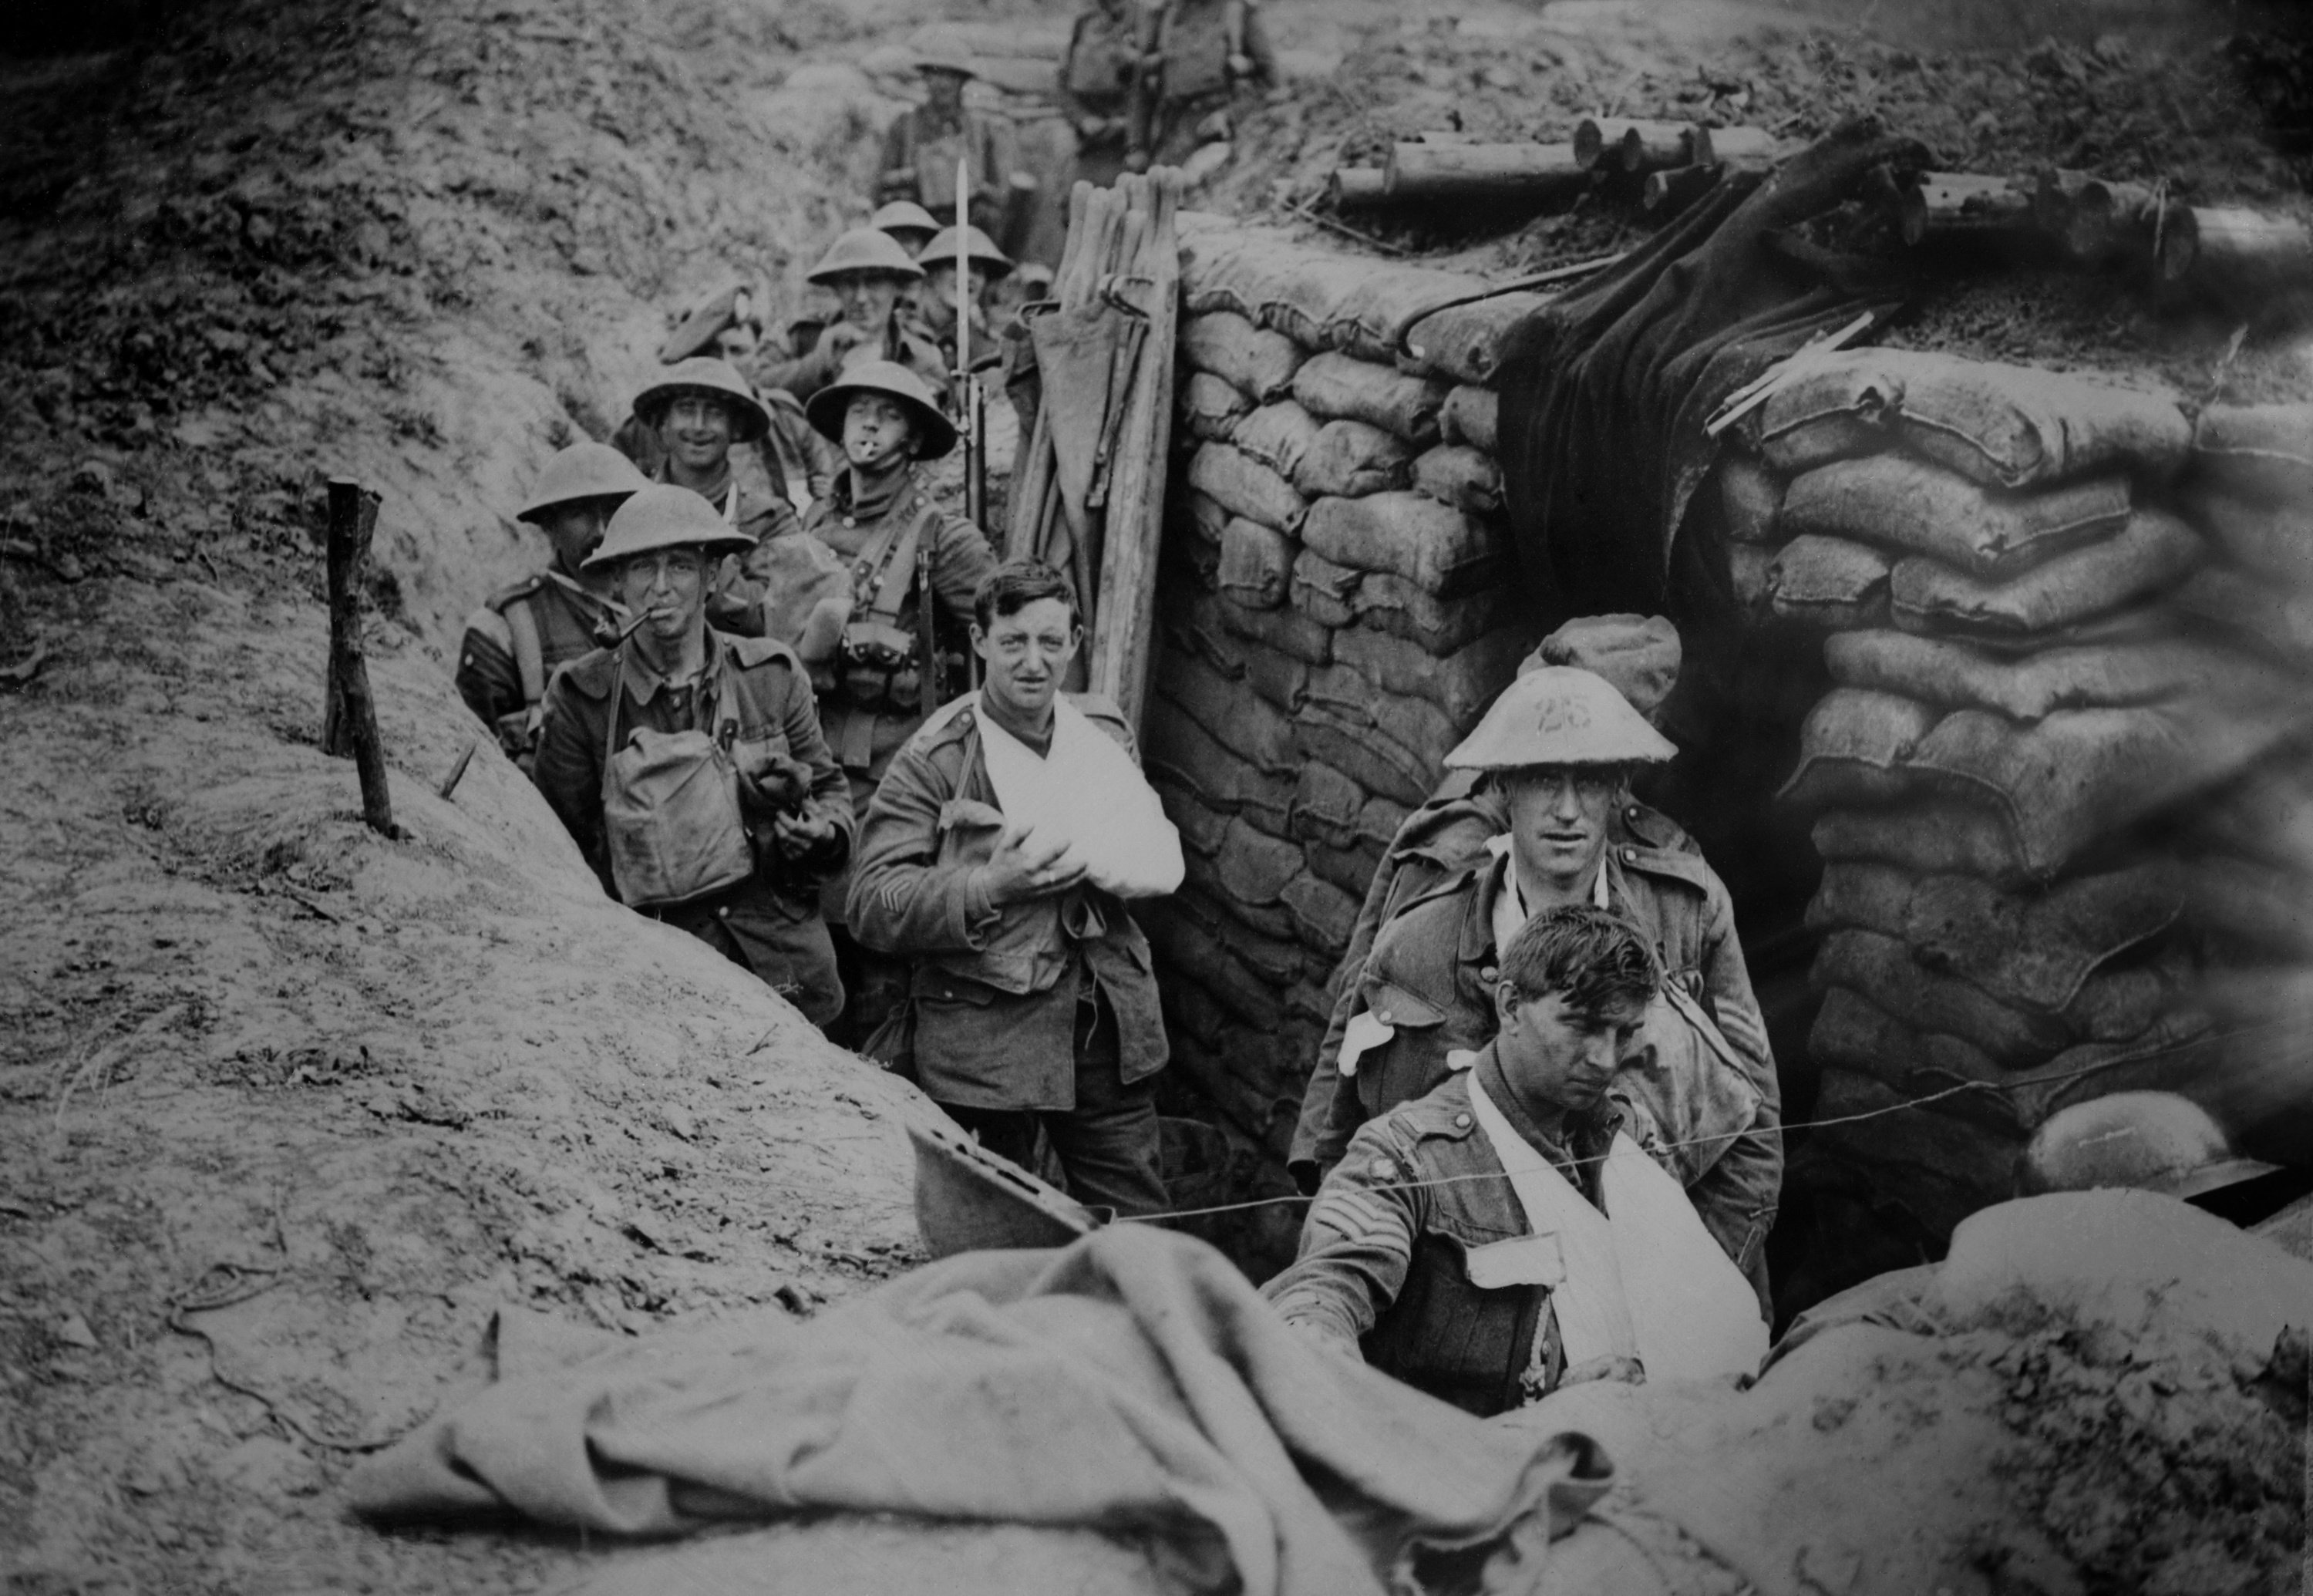 British soldiers fight in the trenches during WWI. Photo: Shutterstock